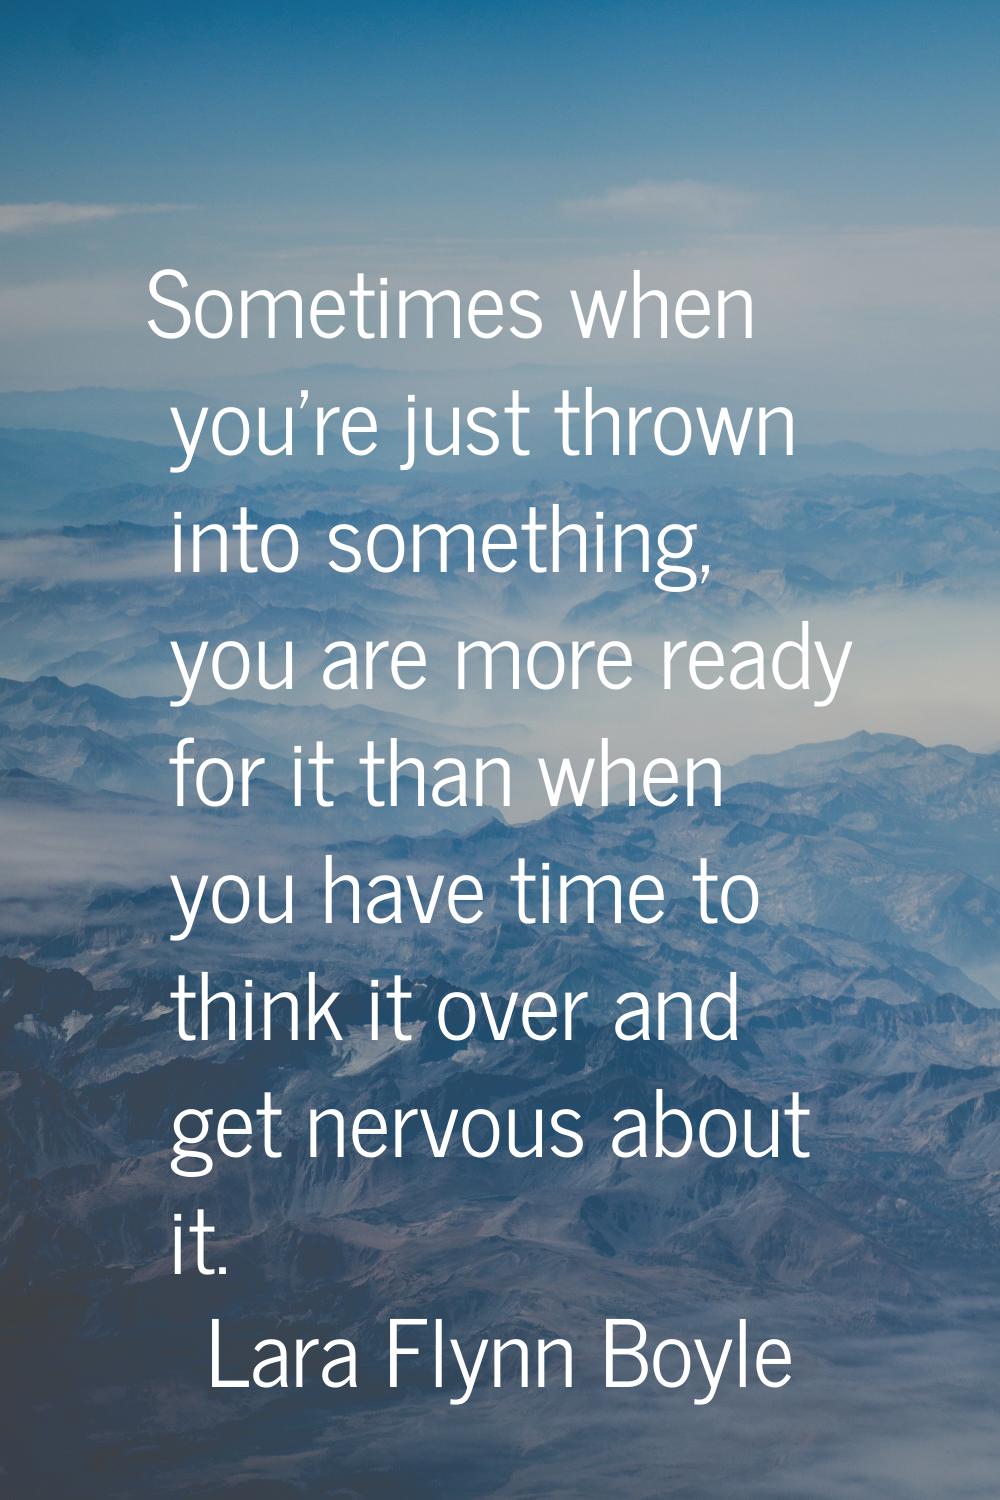 Sometimes when you're just thrown into something, you are more ready for it than when you have time